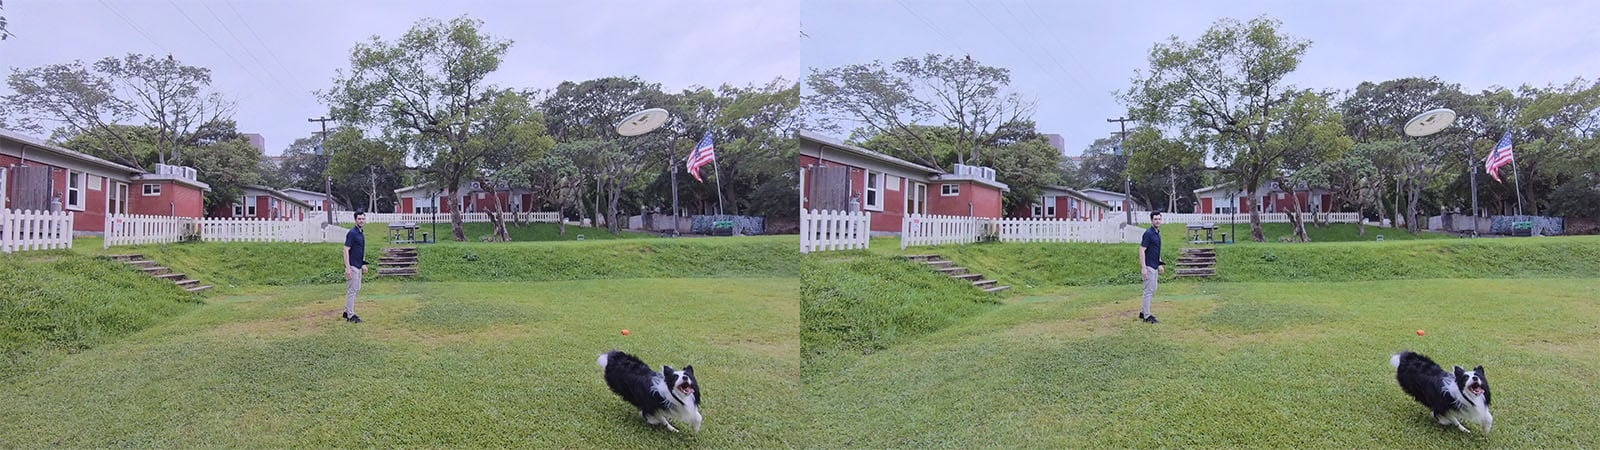 A person stands on a grassy lawn, framed by several houses and trees. An American flag is visible on a flagpole. A black and white dog runs across the lawn. The image is a side-by-side comparison of two similar scenes.